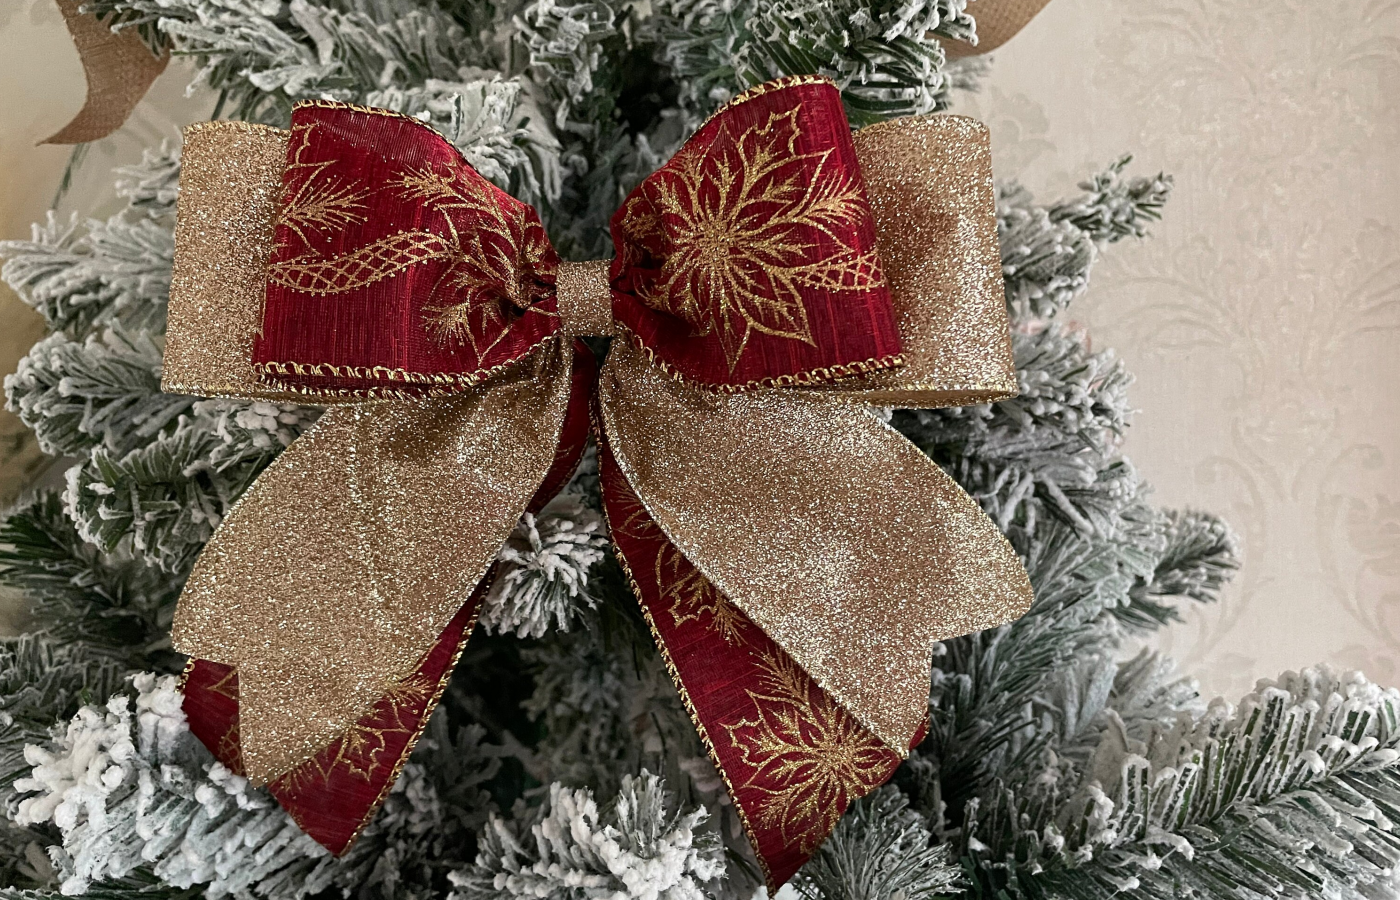 DIY Christmas Bows A Simple and Affordable Way to Add Festive Cheer to Your Holiday Decorations